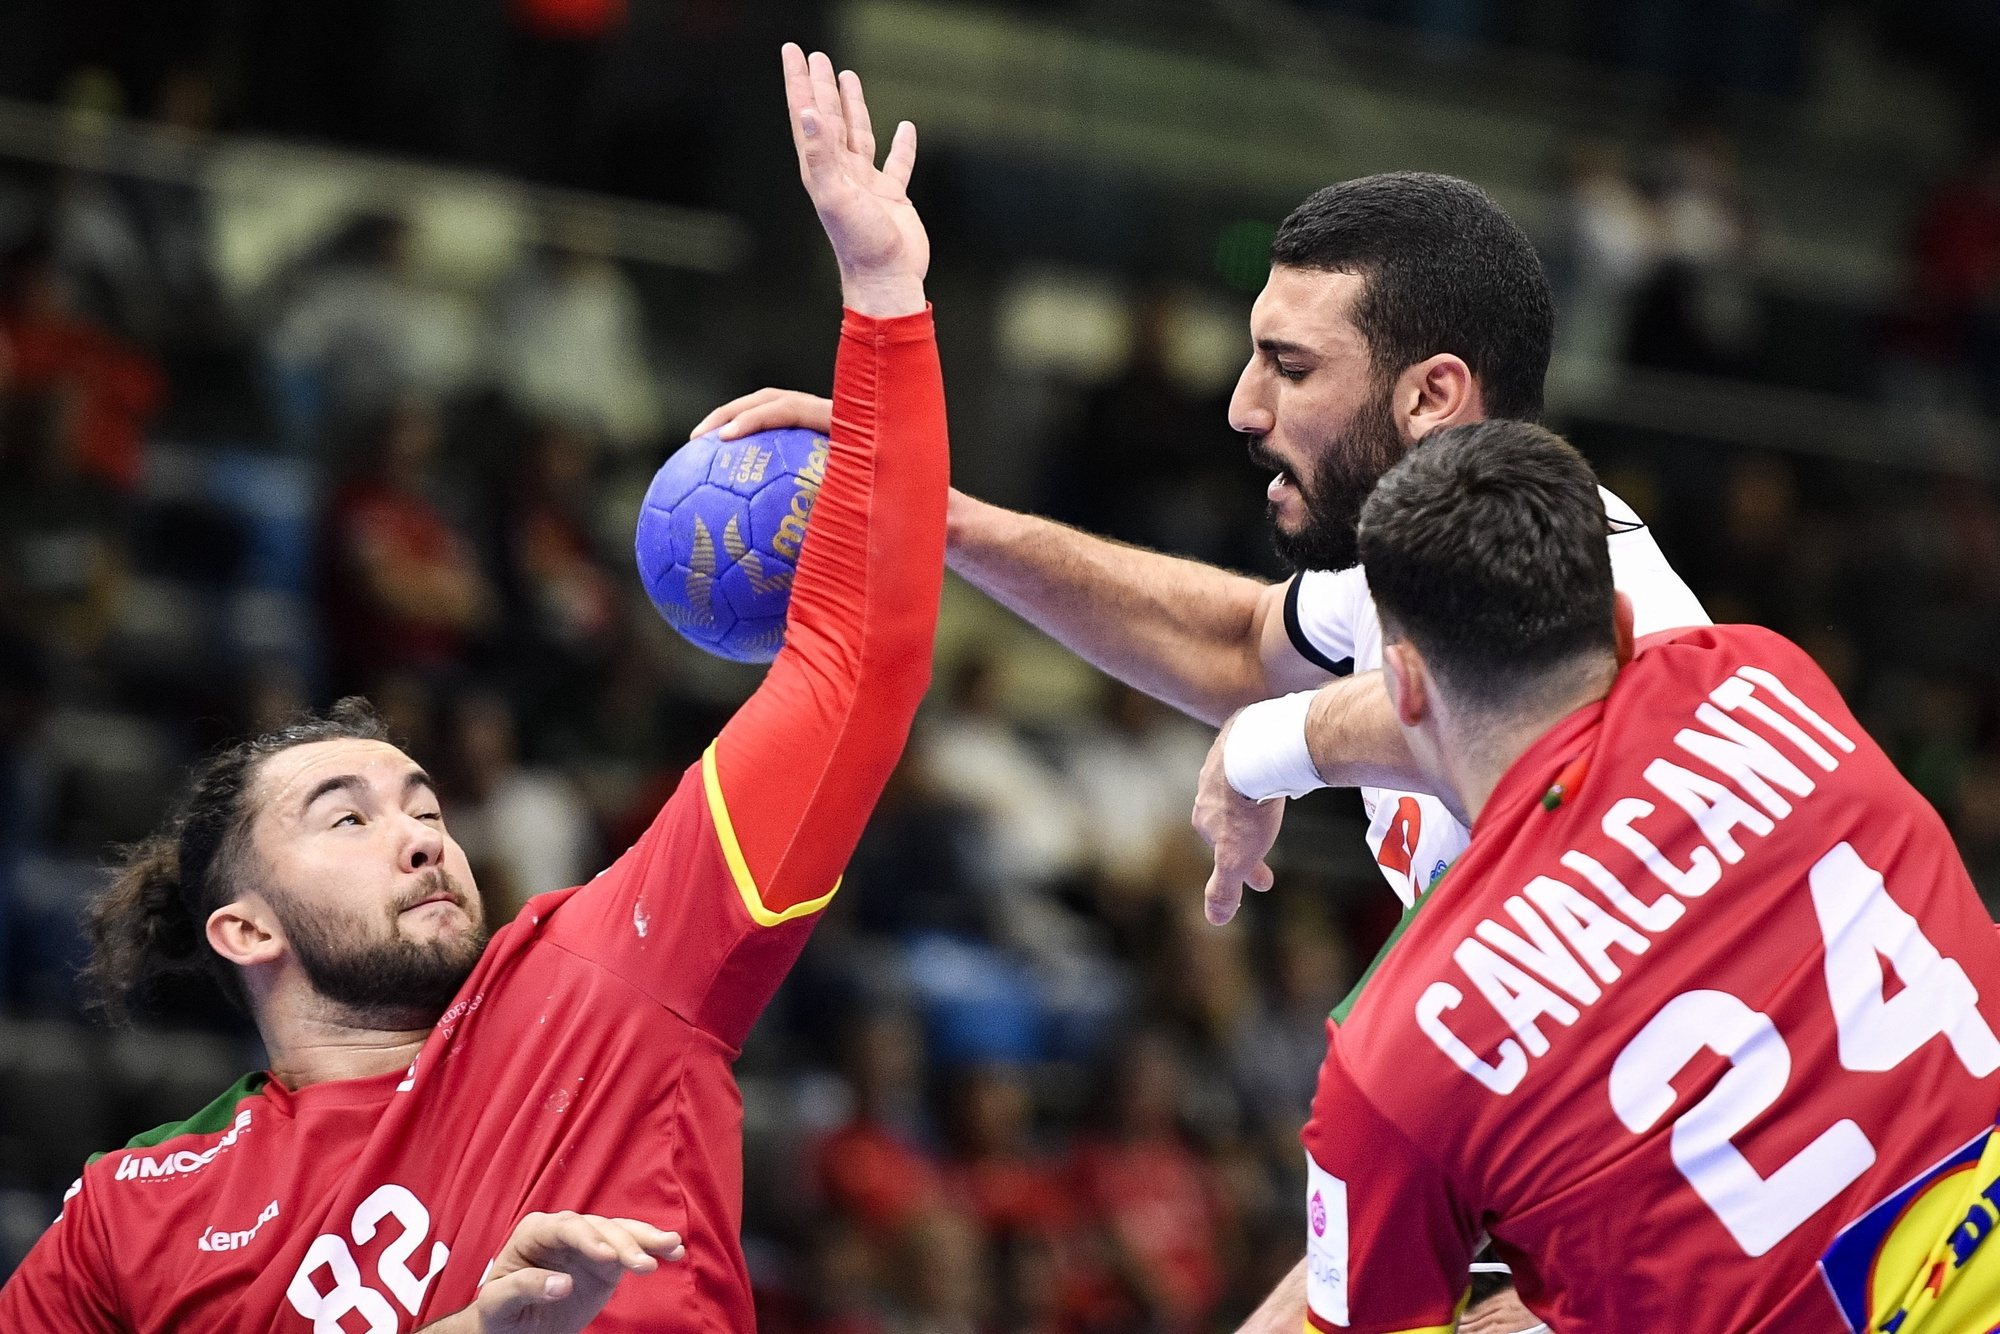 epa11224410 Hazem Baha (C) of Tunisia is blocked by Alexandre Cavalcanti (R) and Luis Frade of Portugal during the 2024 Olympic Games qualifying handball match between Portugal and Tunisia in Tatabanya, Hungary, 16 March 2024.  EPA/Boglarka Bodnar HUNGARY OUT